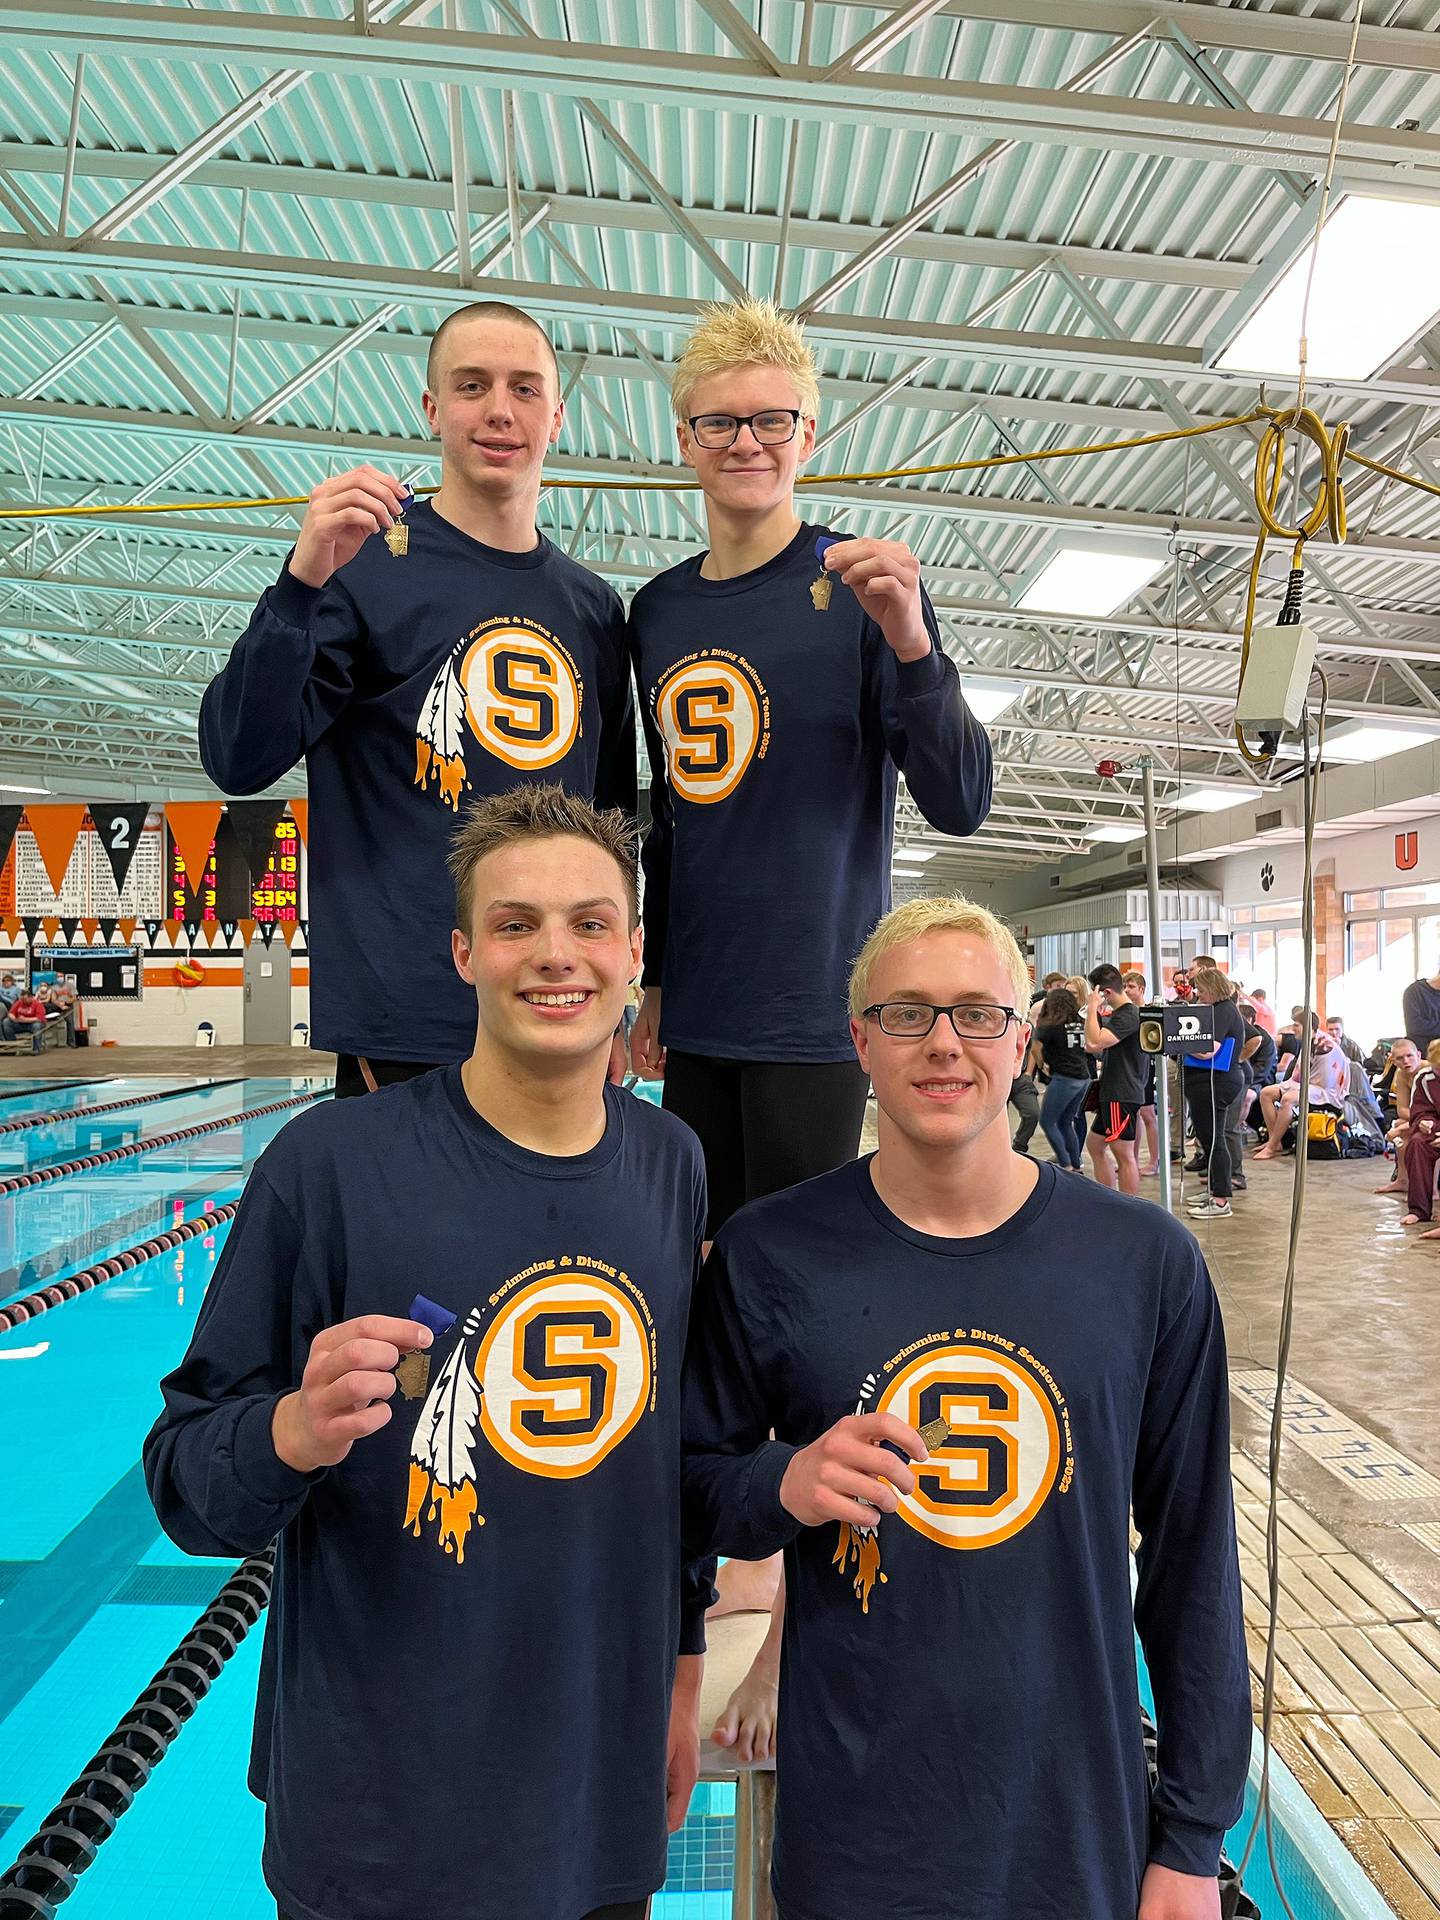 Sterling's 200 freestyle relay members pose with their medals after winning the race Saturday at the United Township Sectional in East Moline. The swimmers were (clockwise from top left) Skylar Drolema, Mason Adams, Michael Garland and Reiley Austin.